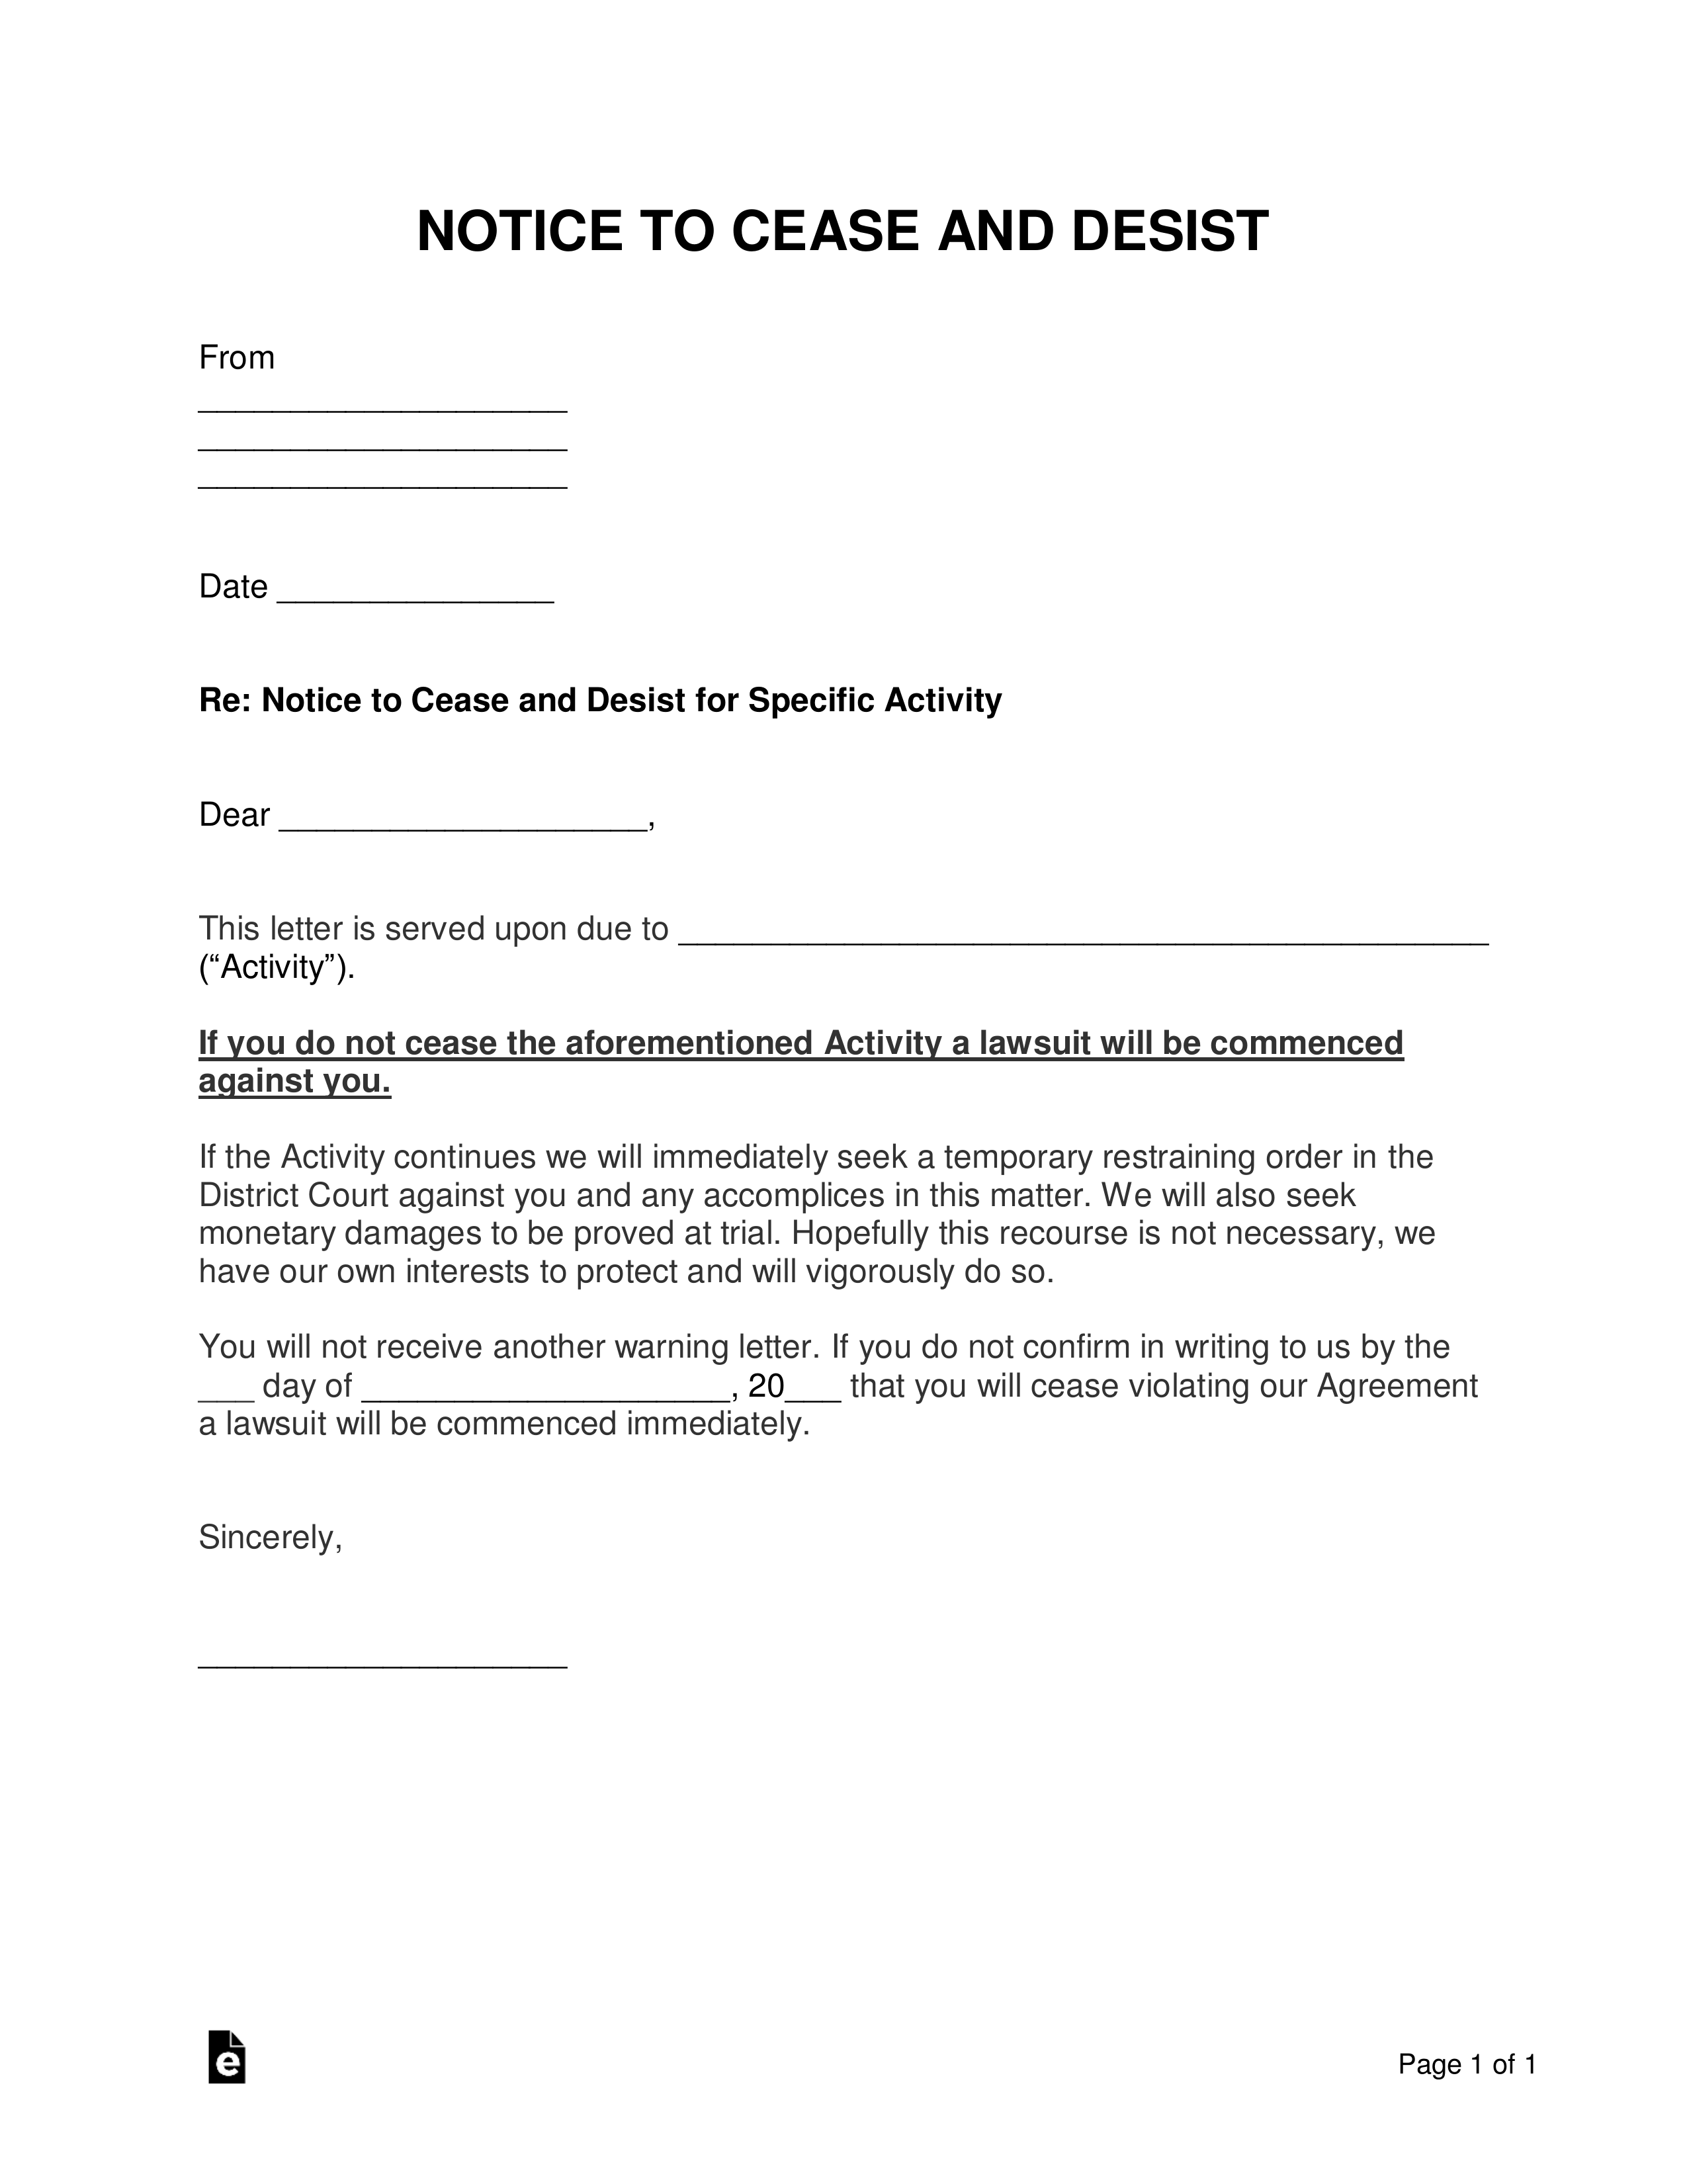 Free Cease and Desist Letter Templates (9) PDF Word eForms